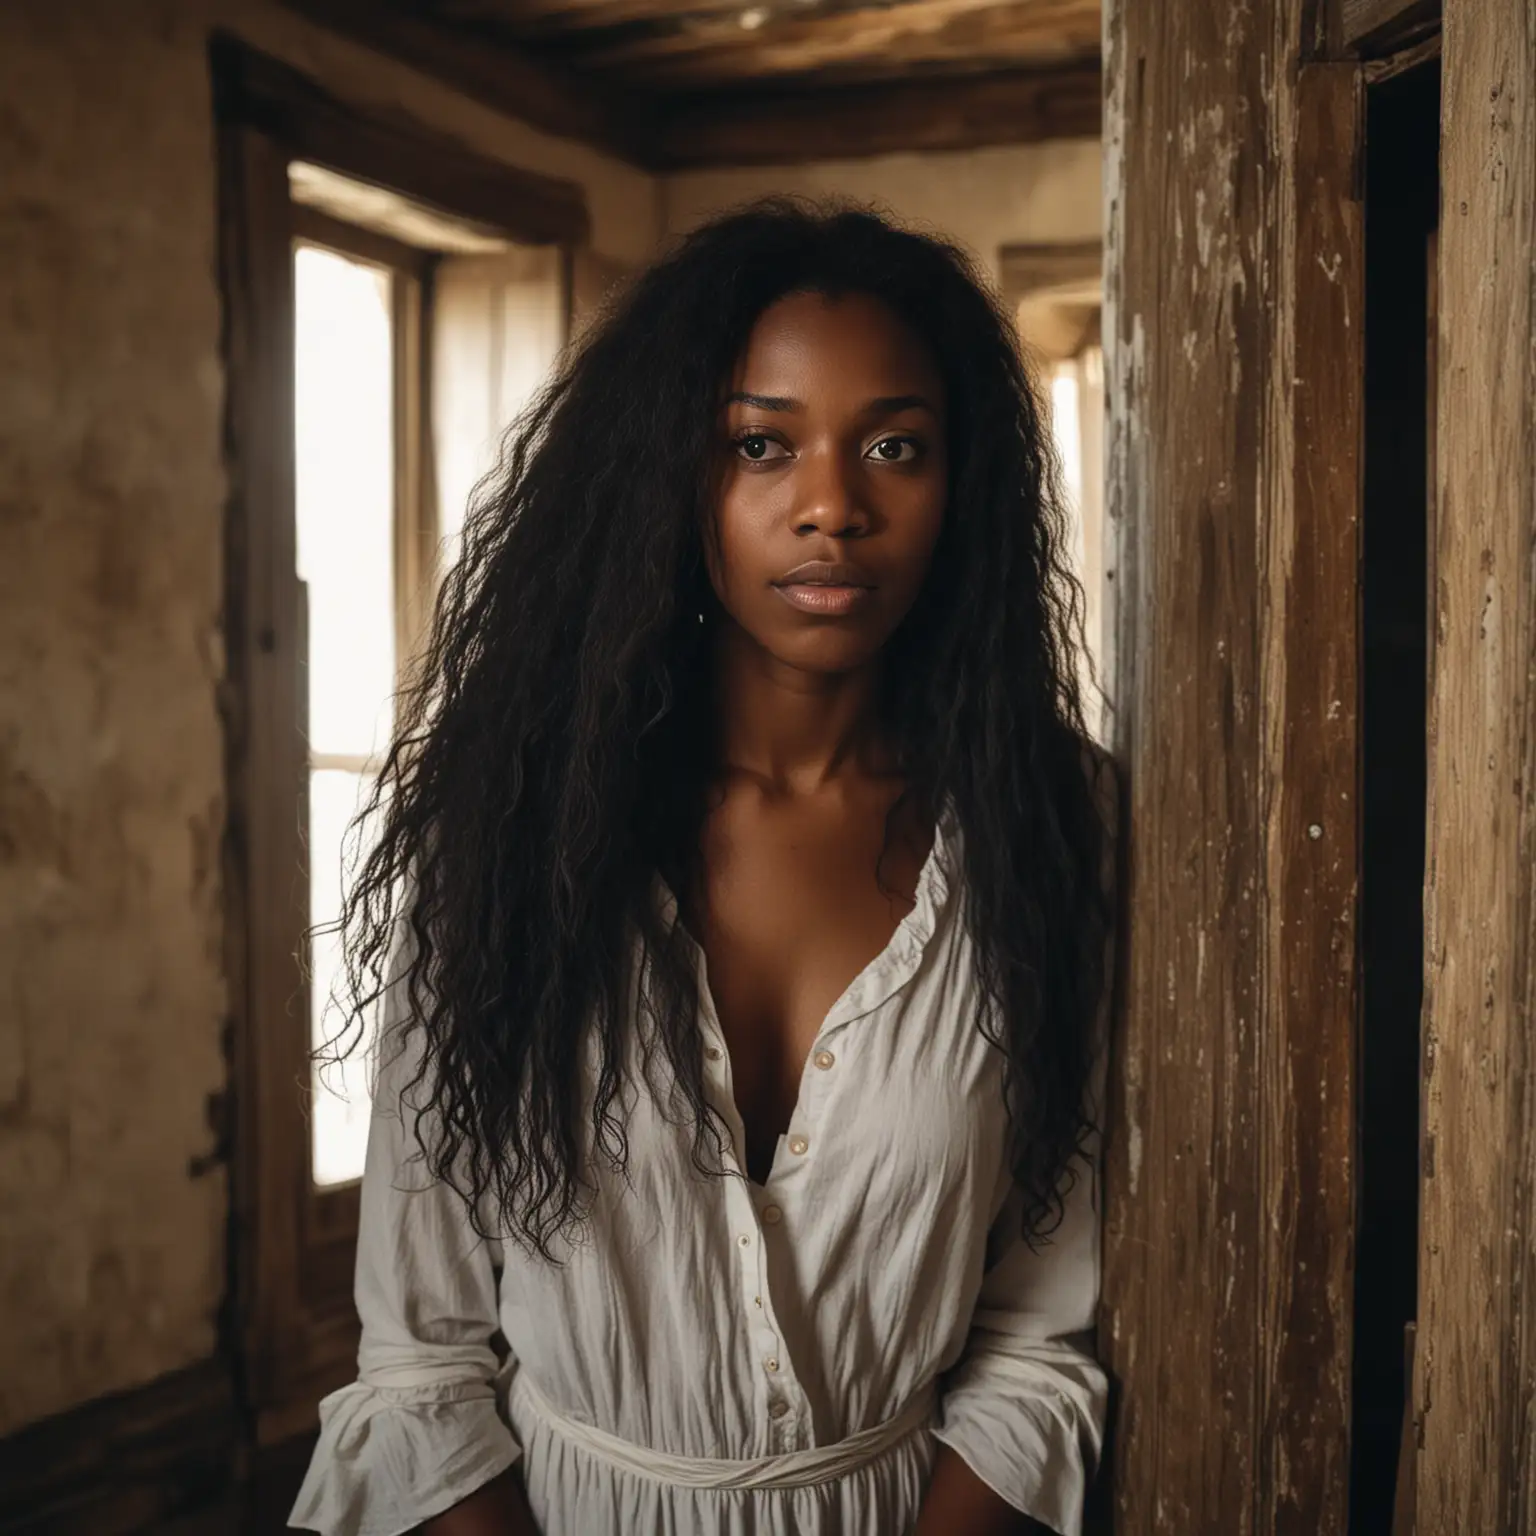 Afraid-Black-Woman-with-Long-Hair-in-Abandoned-House